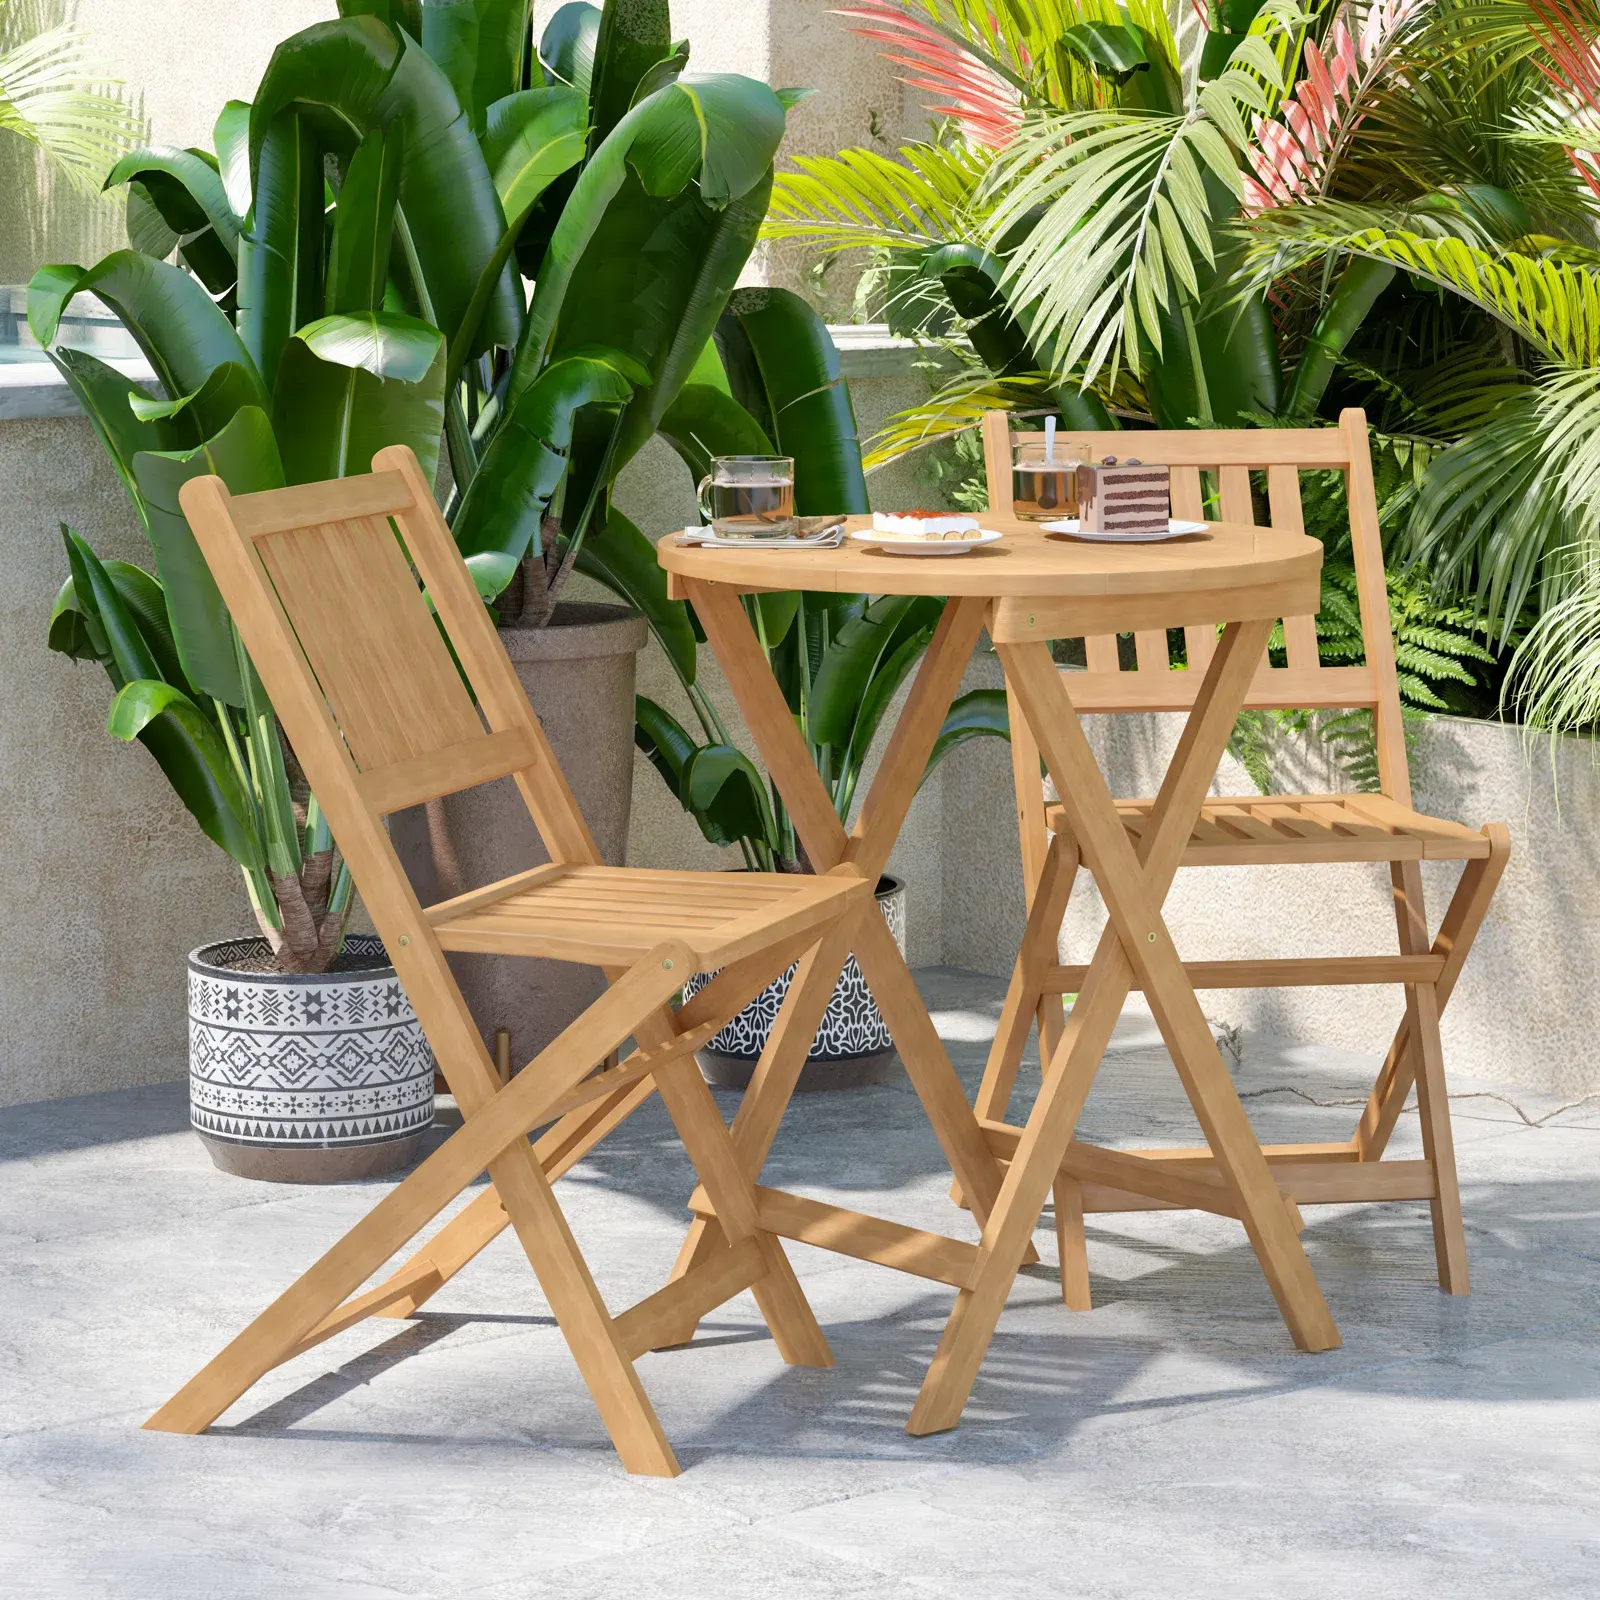 What Wood Is Best for Wood Patio Furniture?